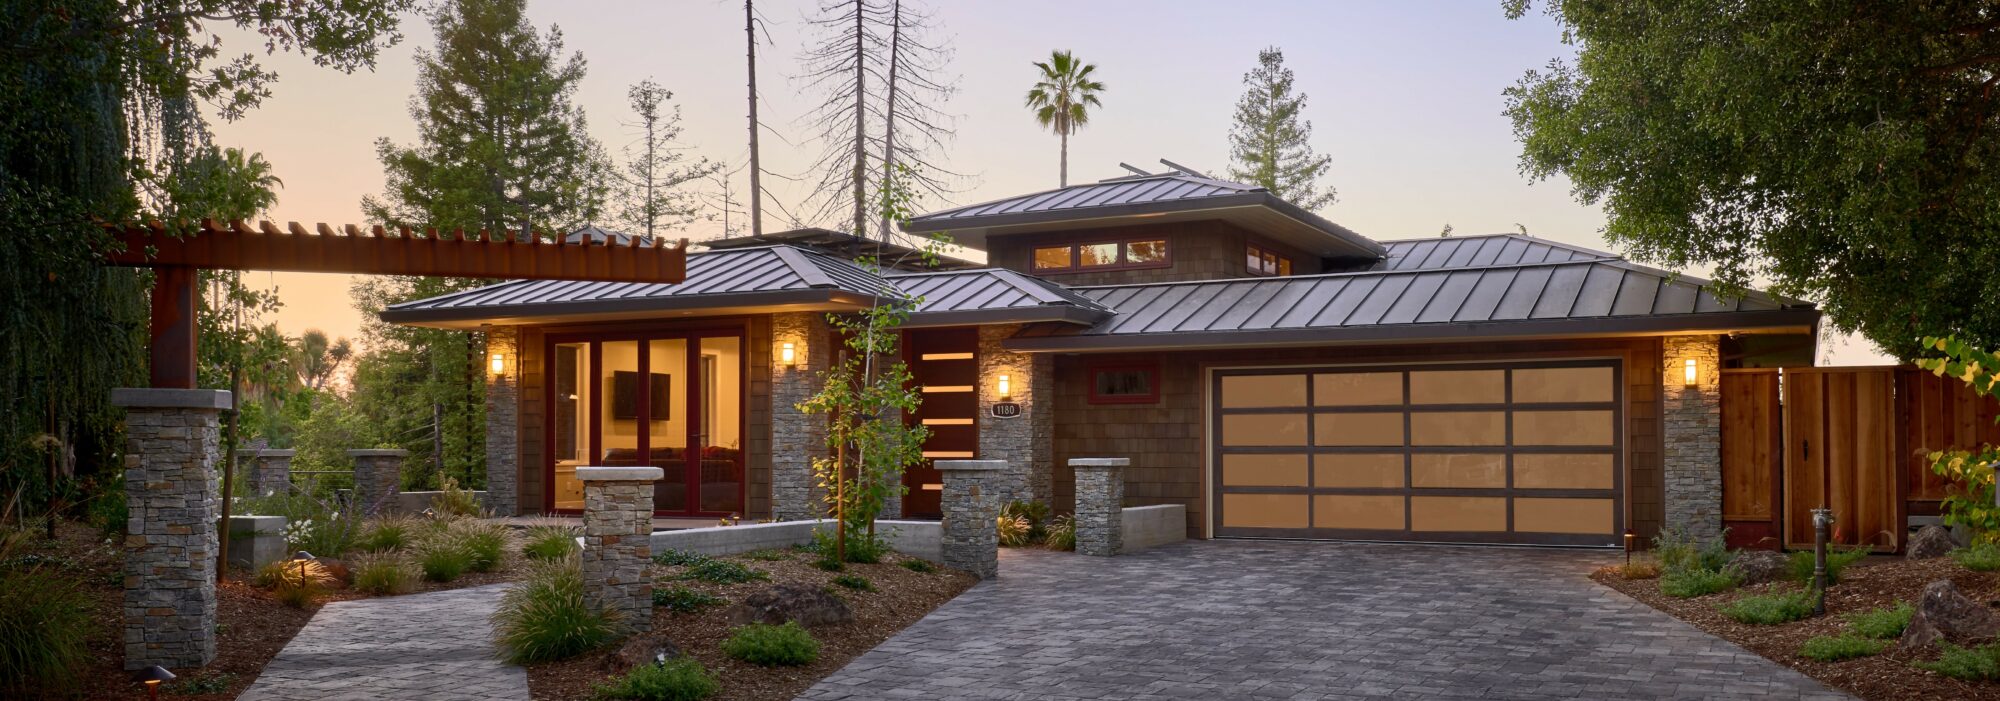 Exterior of Northern California home with tin roof and paved driveway.